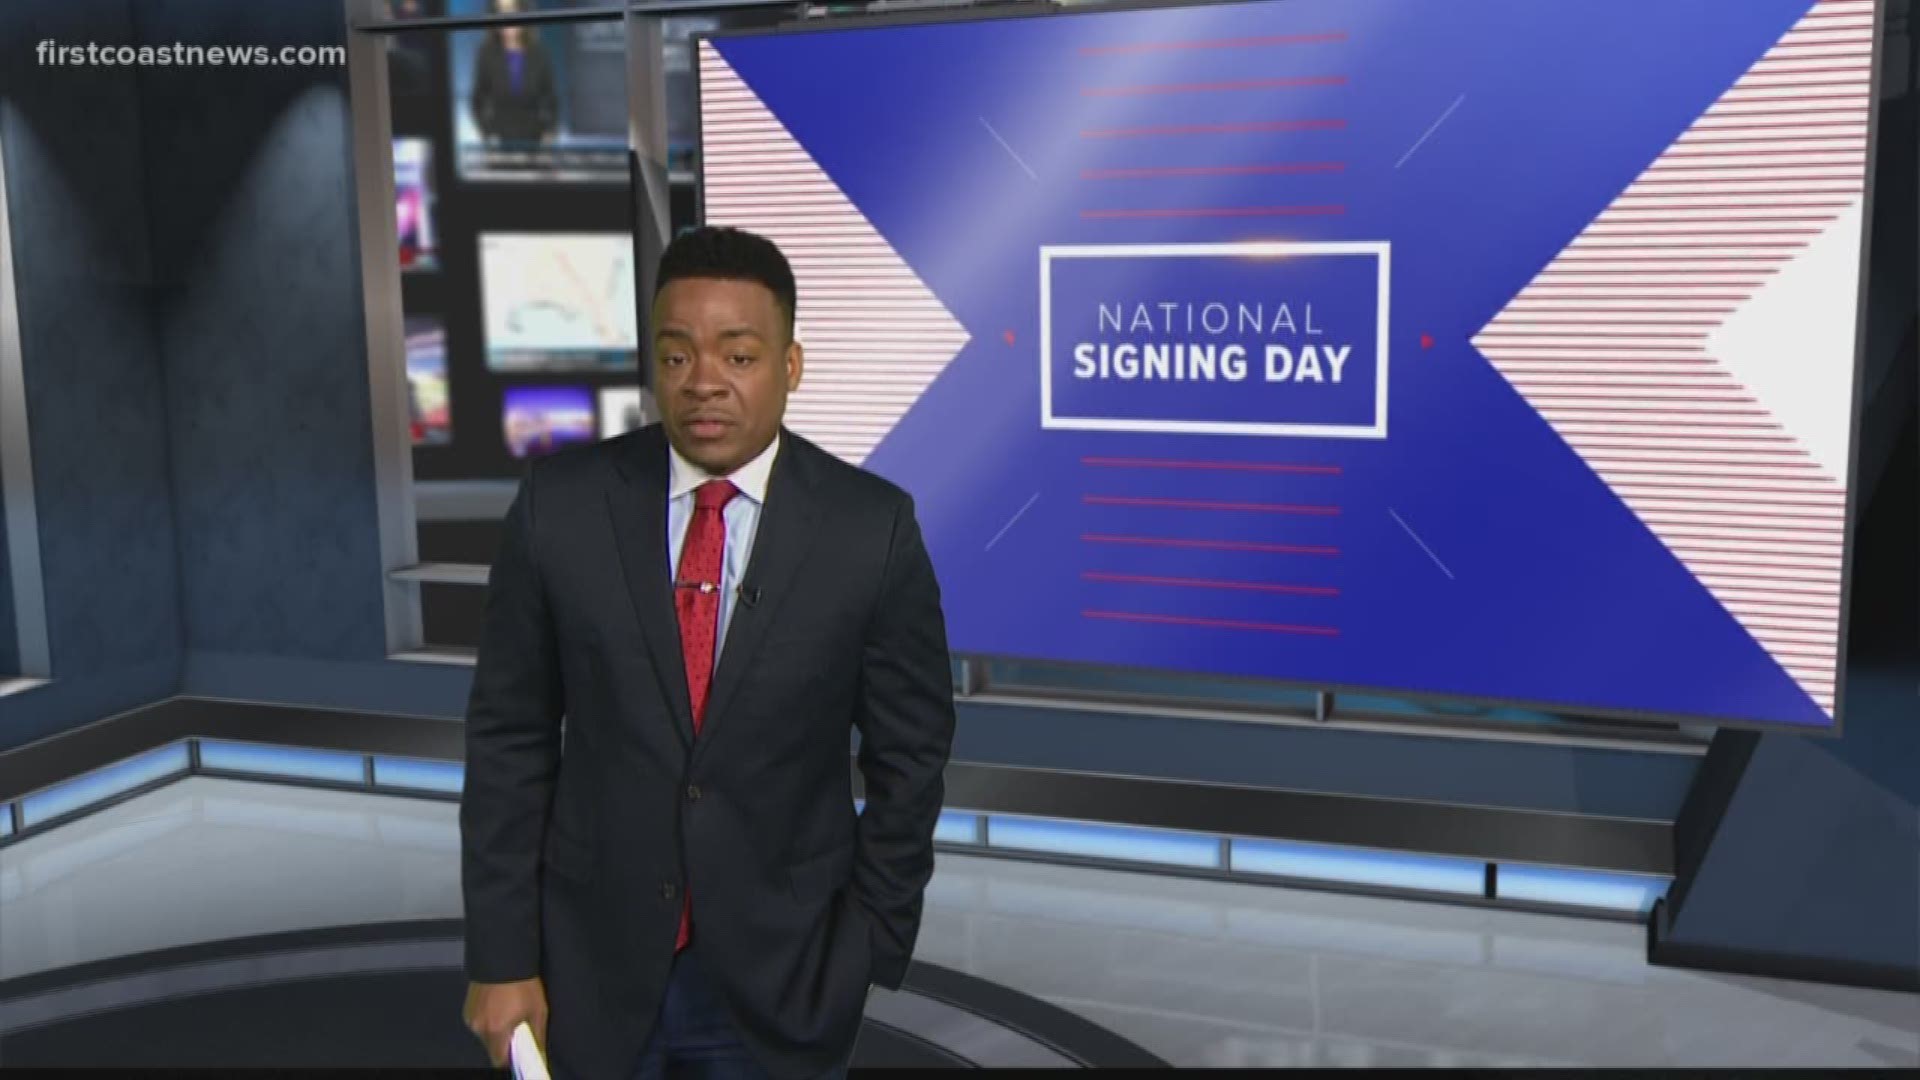 Highlights from signing day 2019